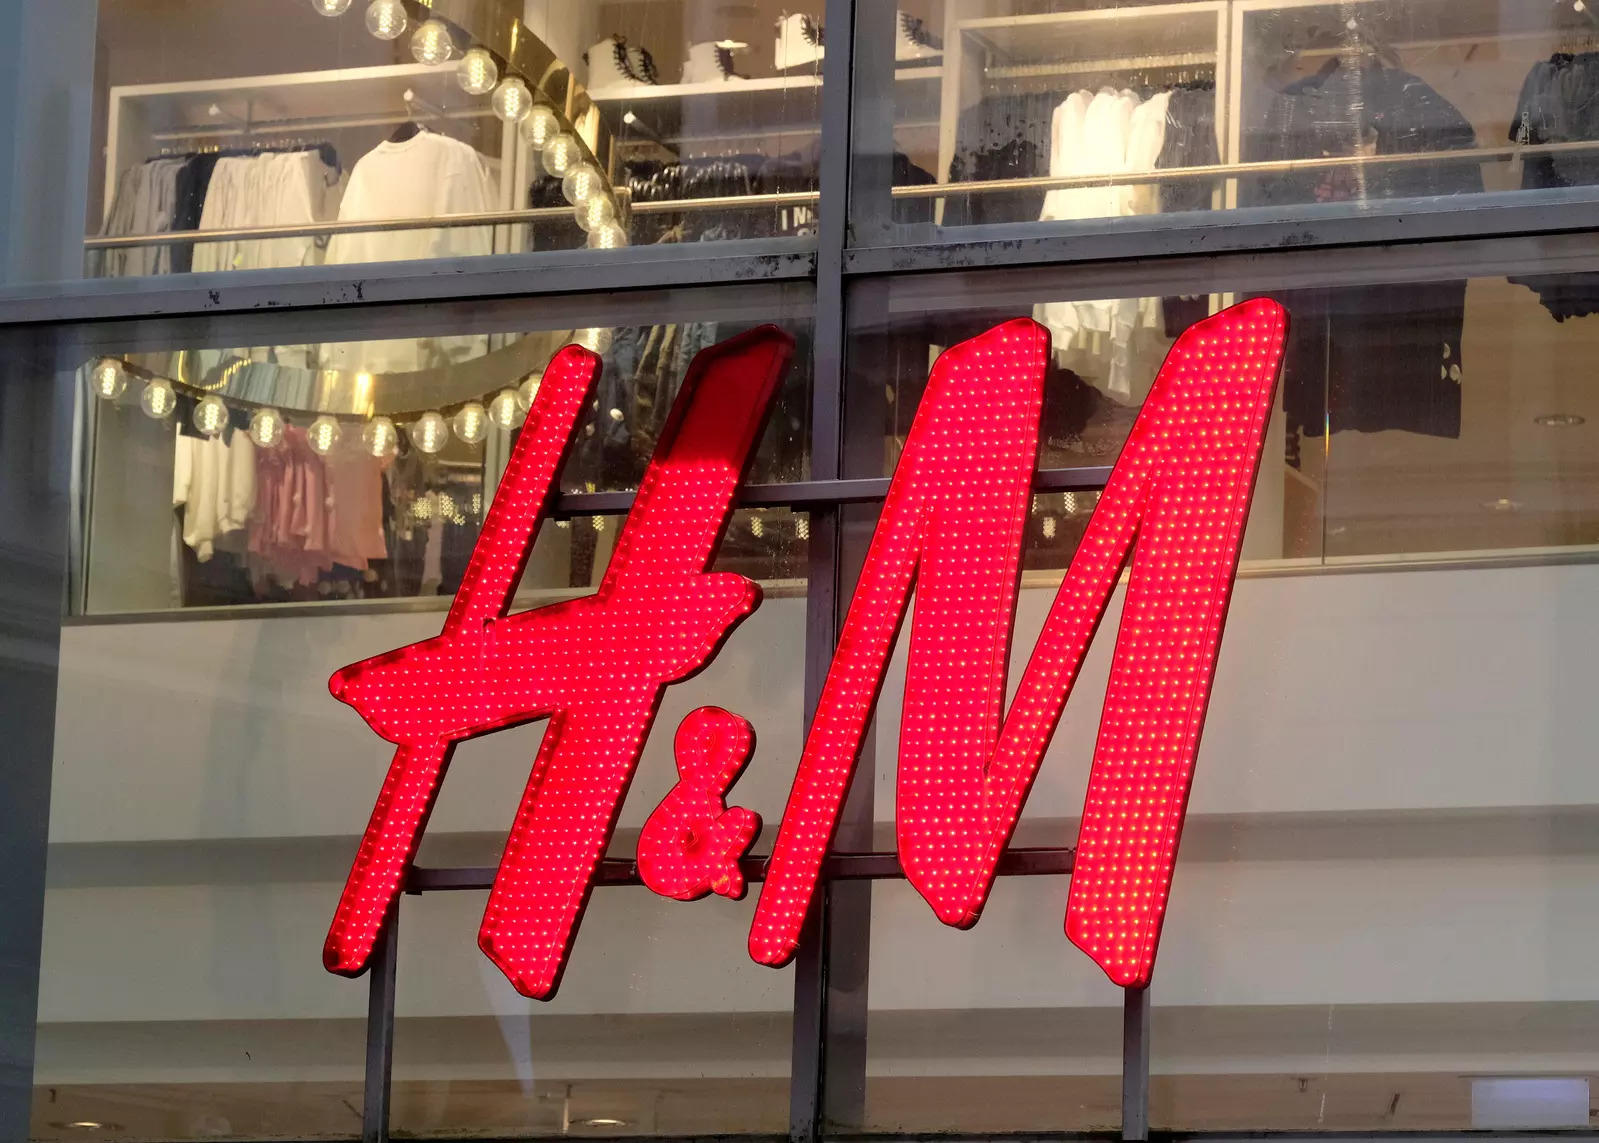 China says H&M changed online map after criticism, Retail News, ET Retail